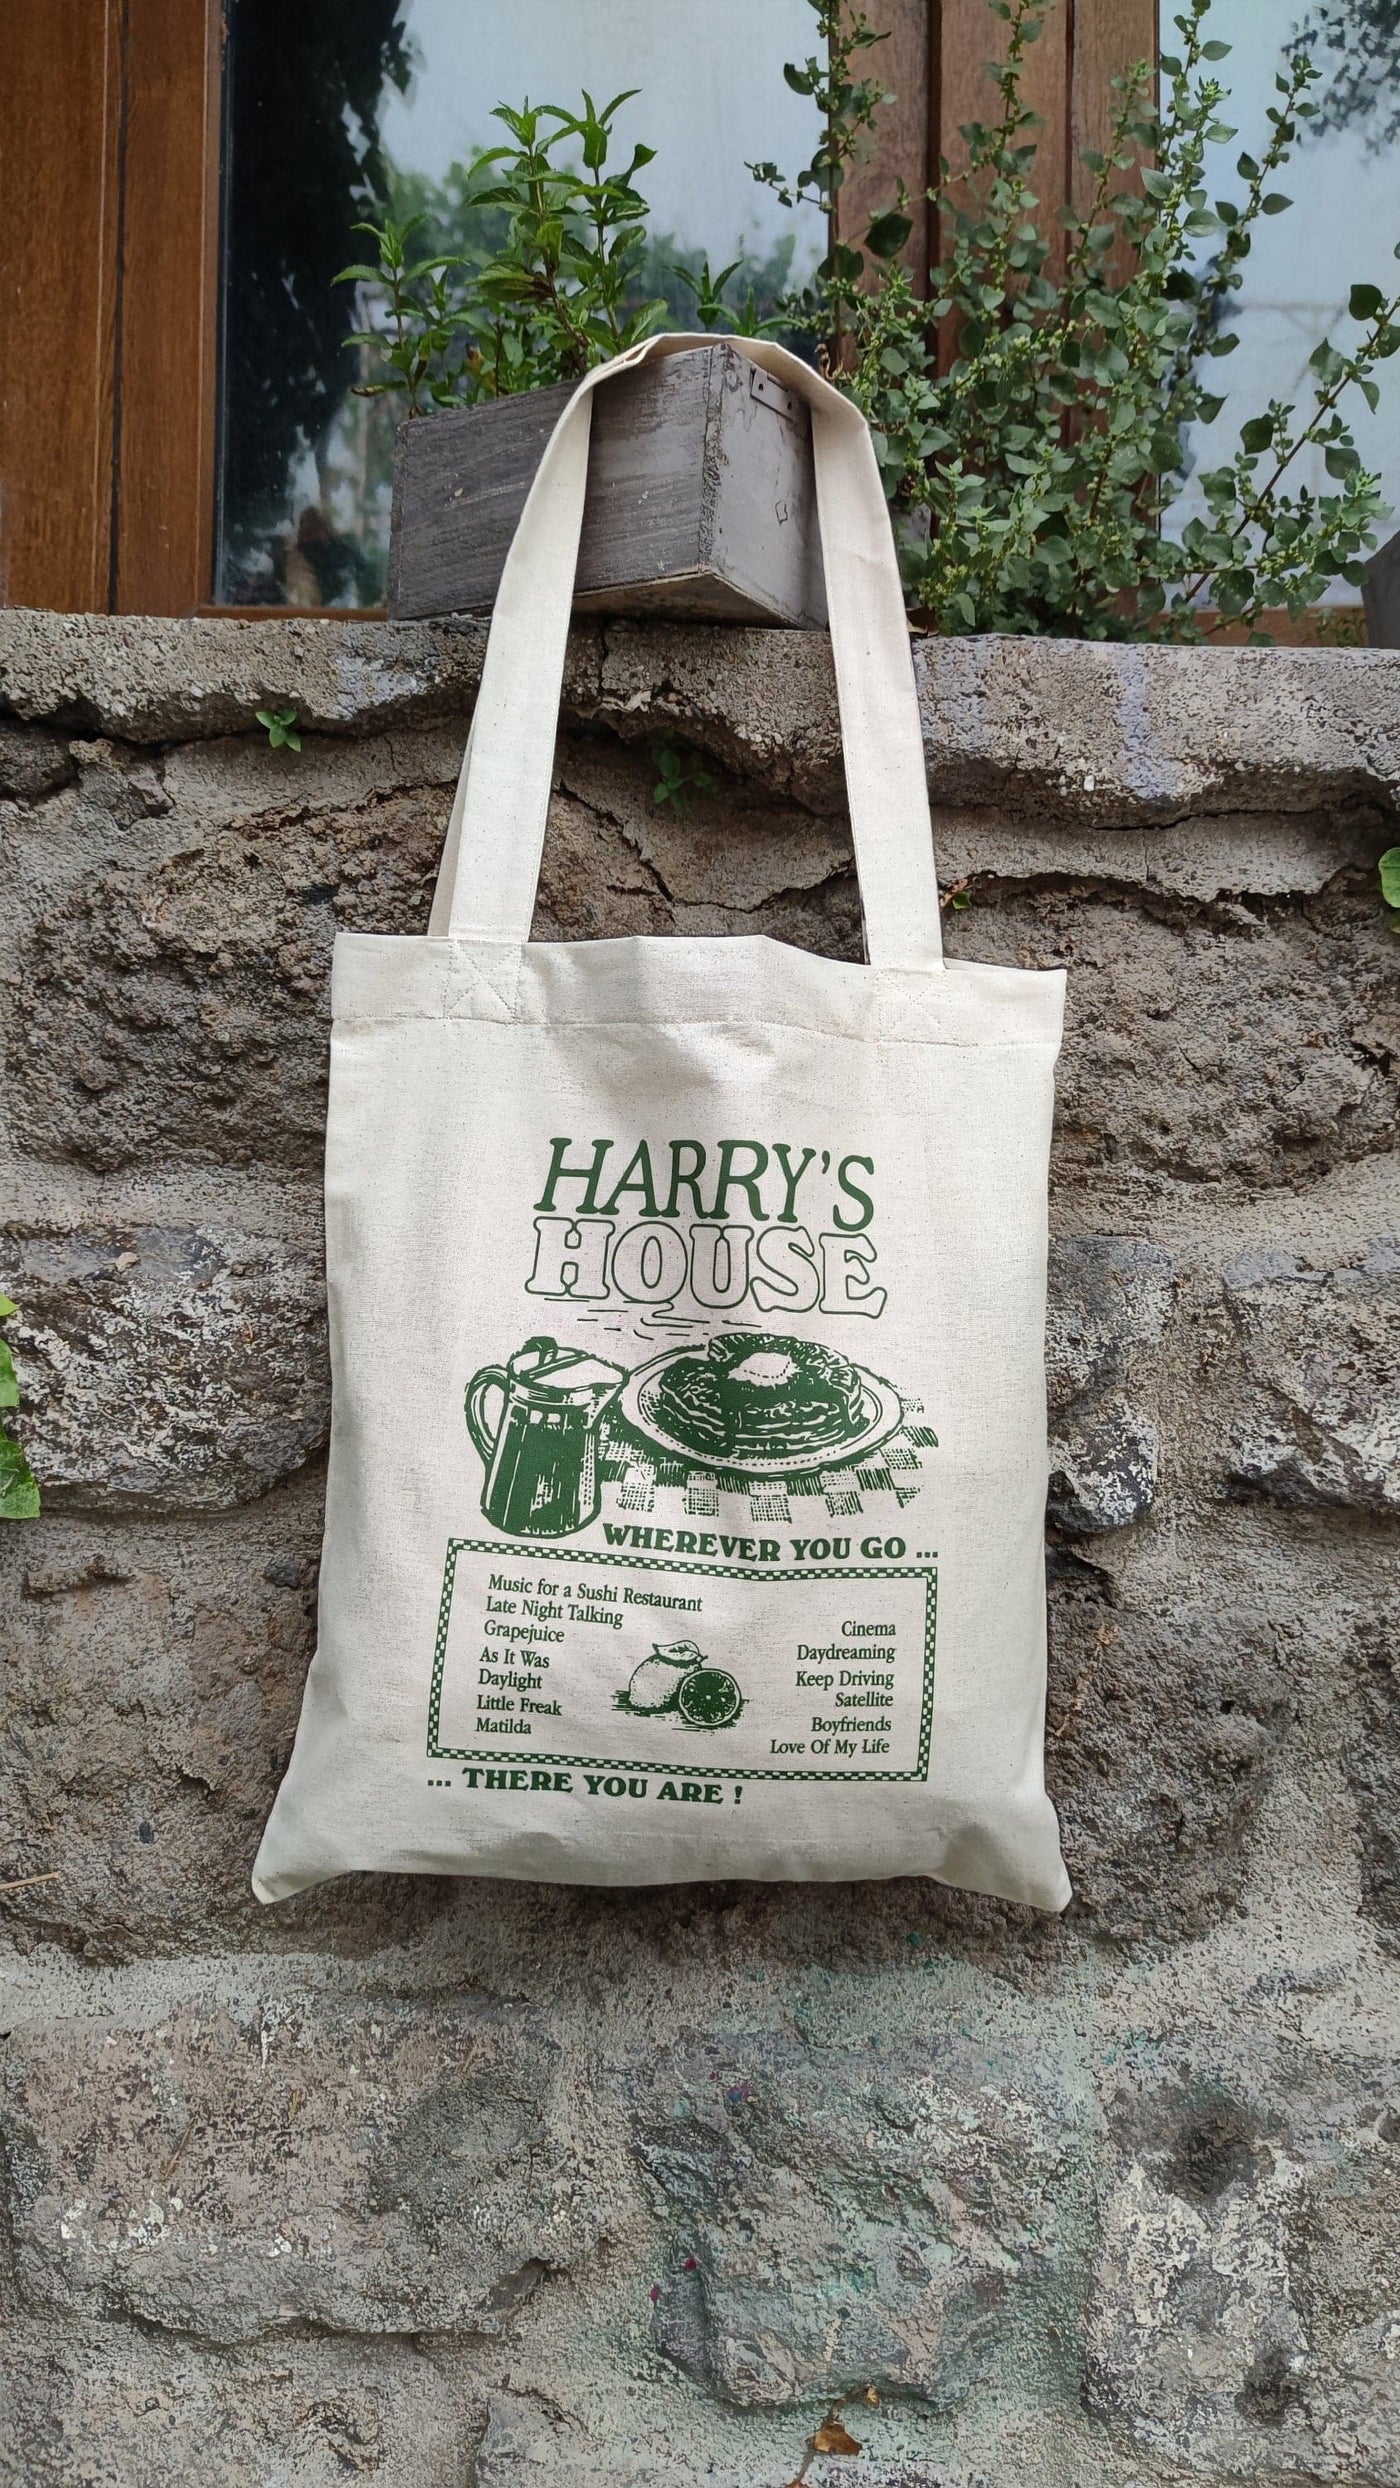 Harry's House Tote Bag, Harry Styles Tote Bag, Harry Styles Merch, Aesthetic Tote Bag